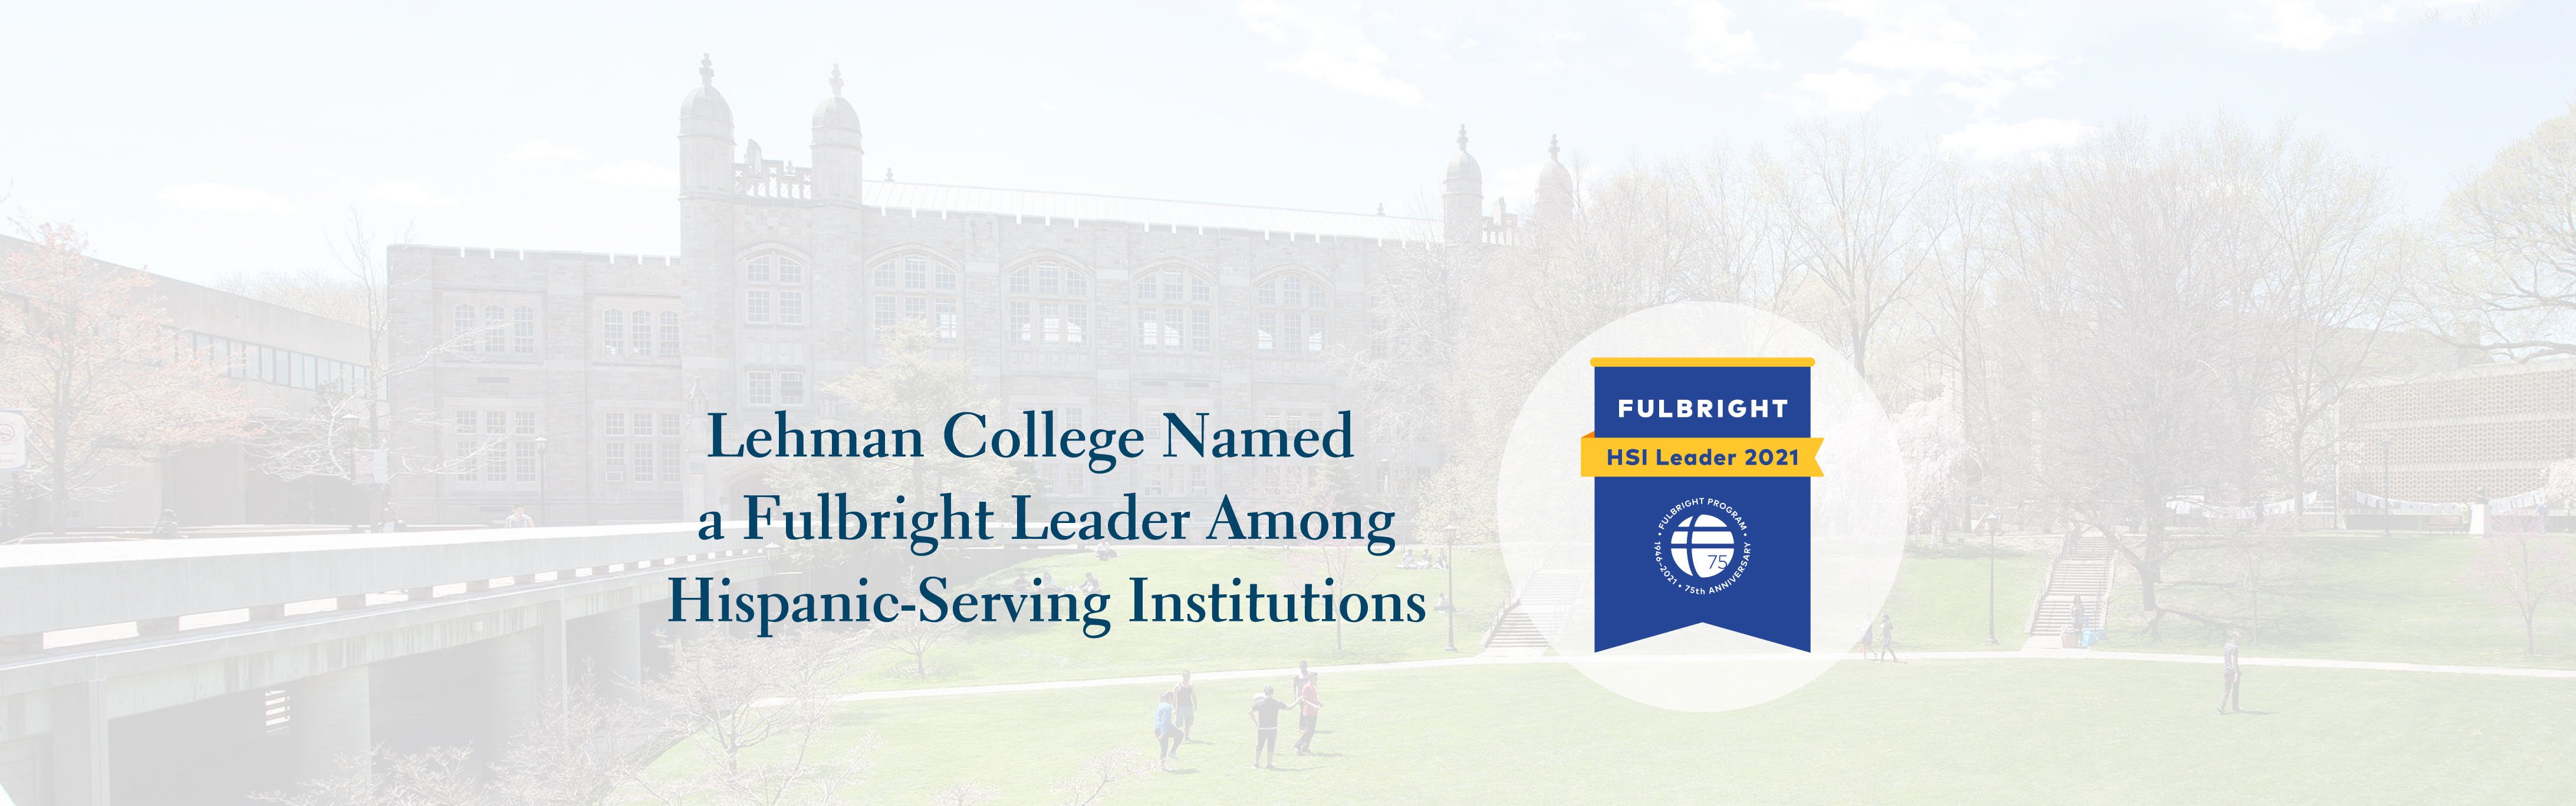 Lehman College Named a Full Bright Leader Among Hispanic Serving Institutions